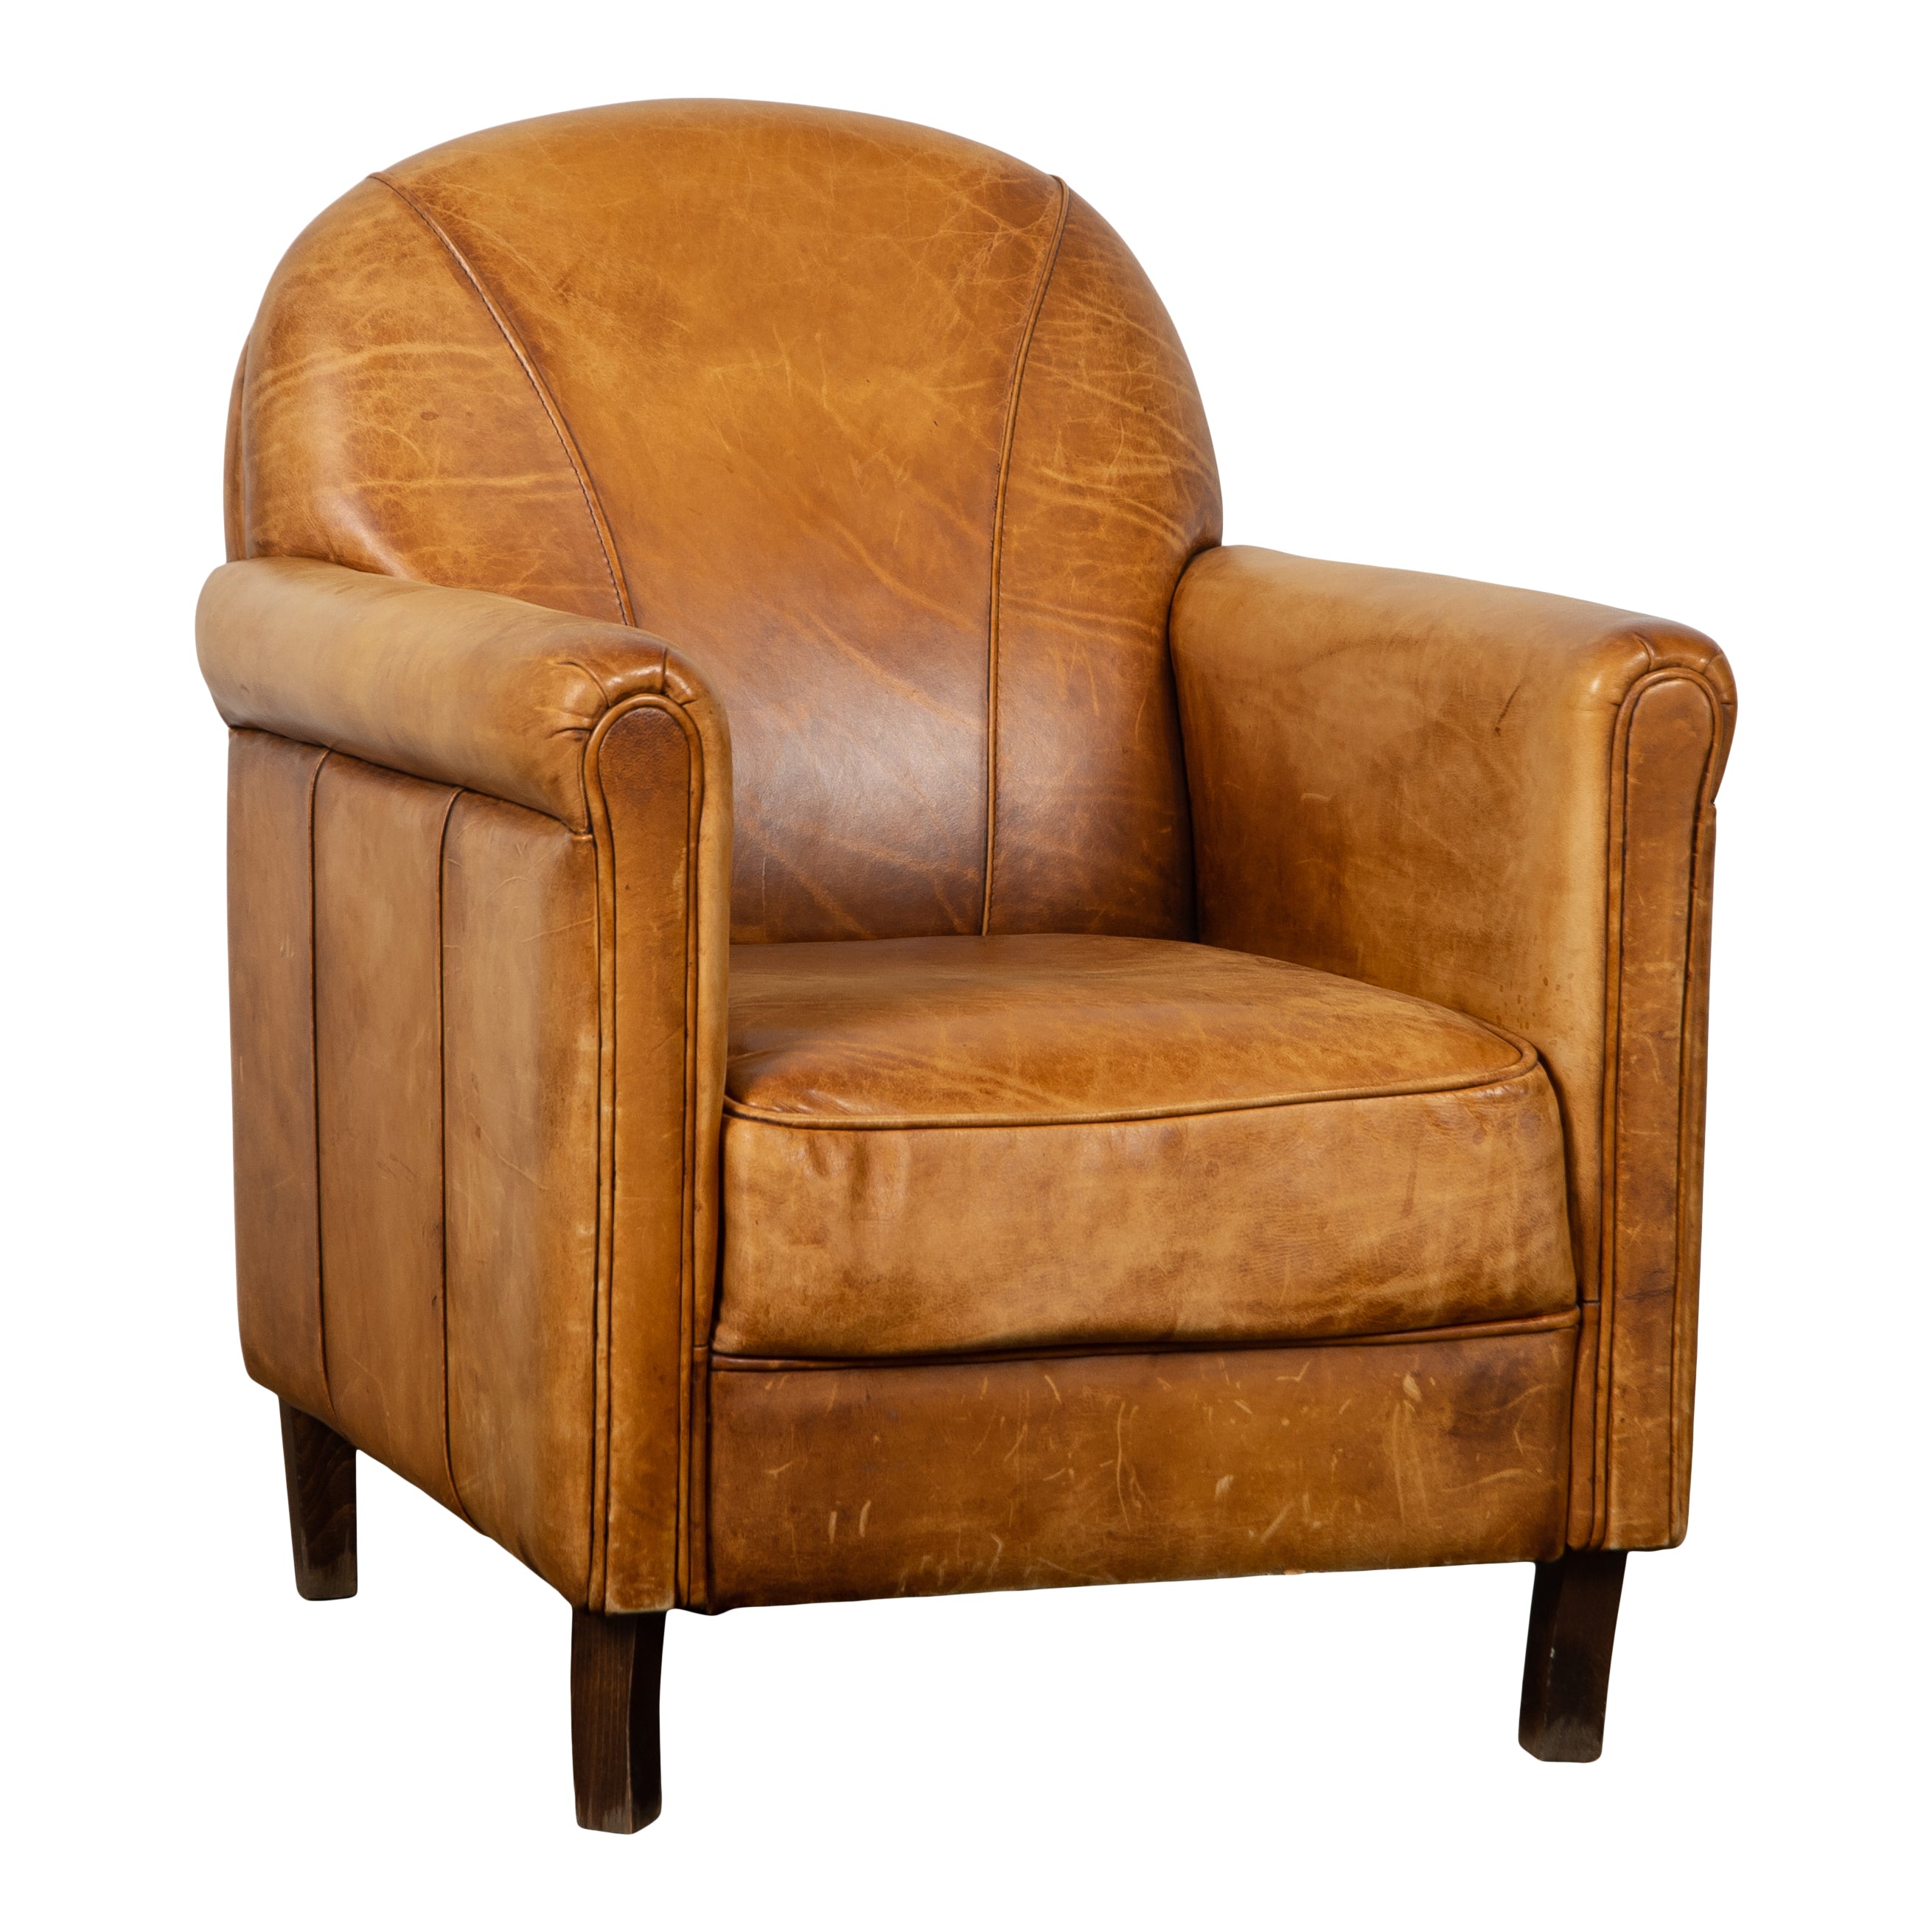 Quinton Leather Chair